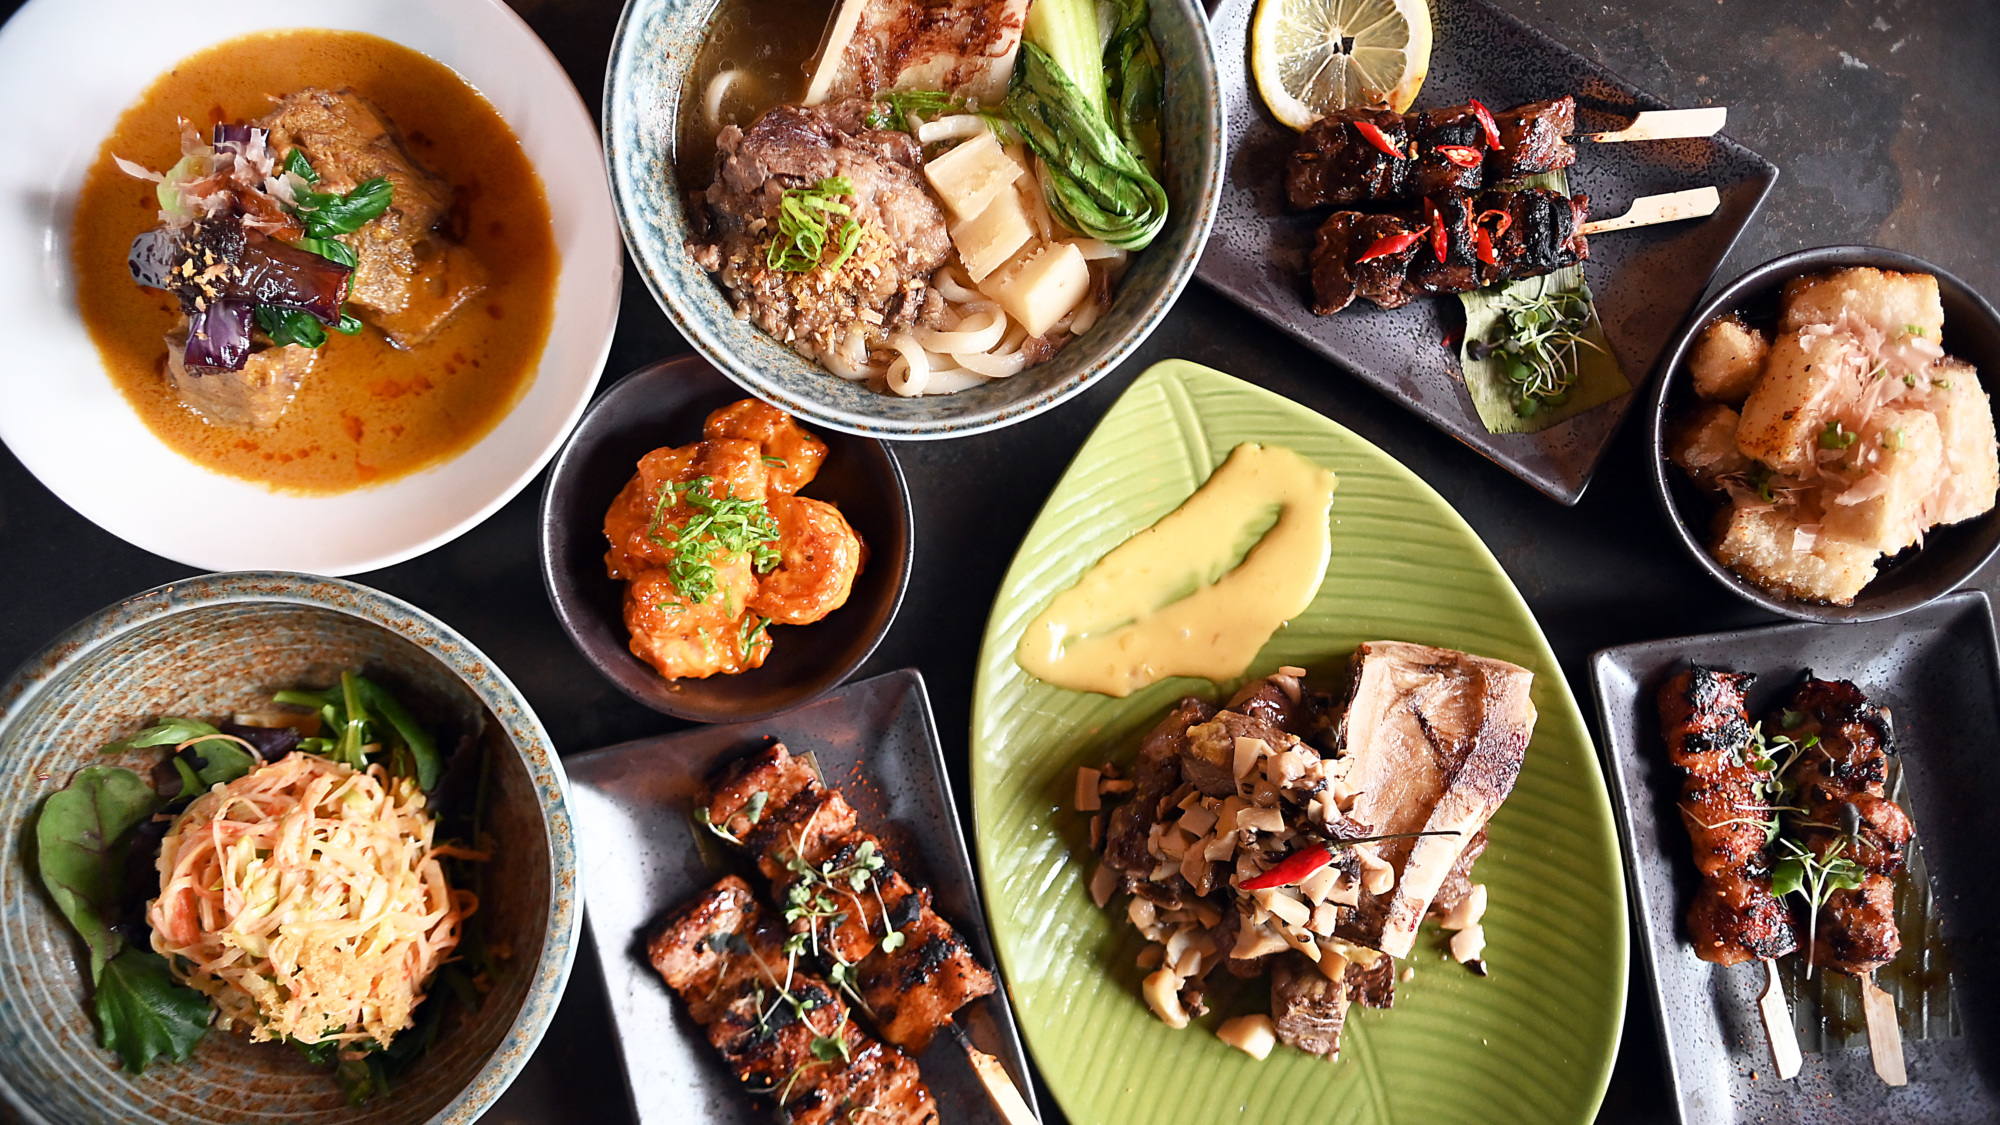 A spread of dishes from Gugu Room, which just opened in May.